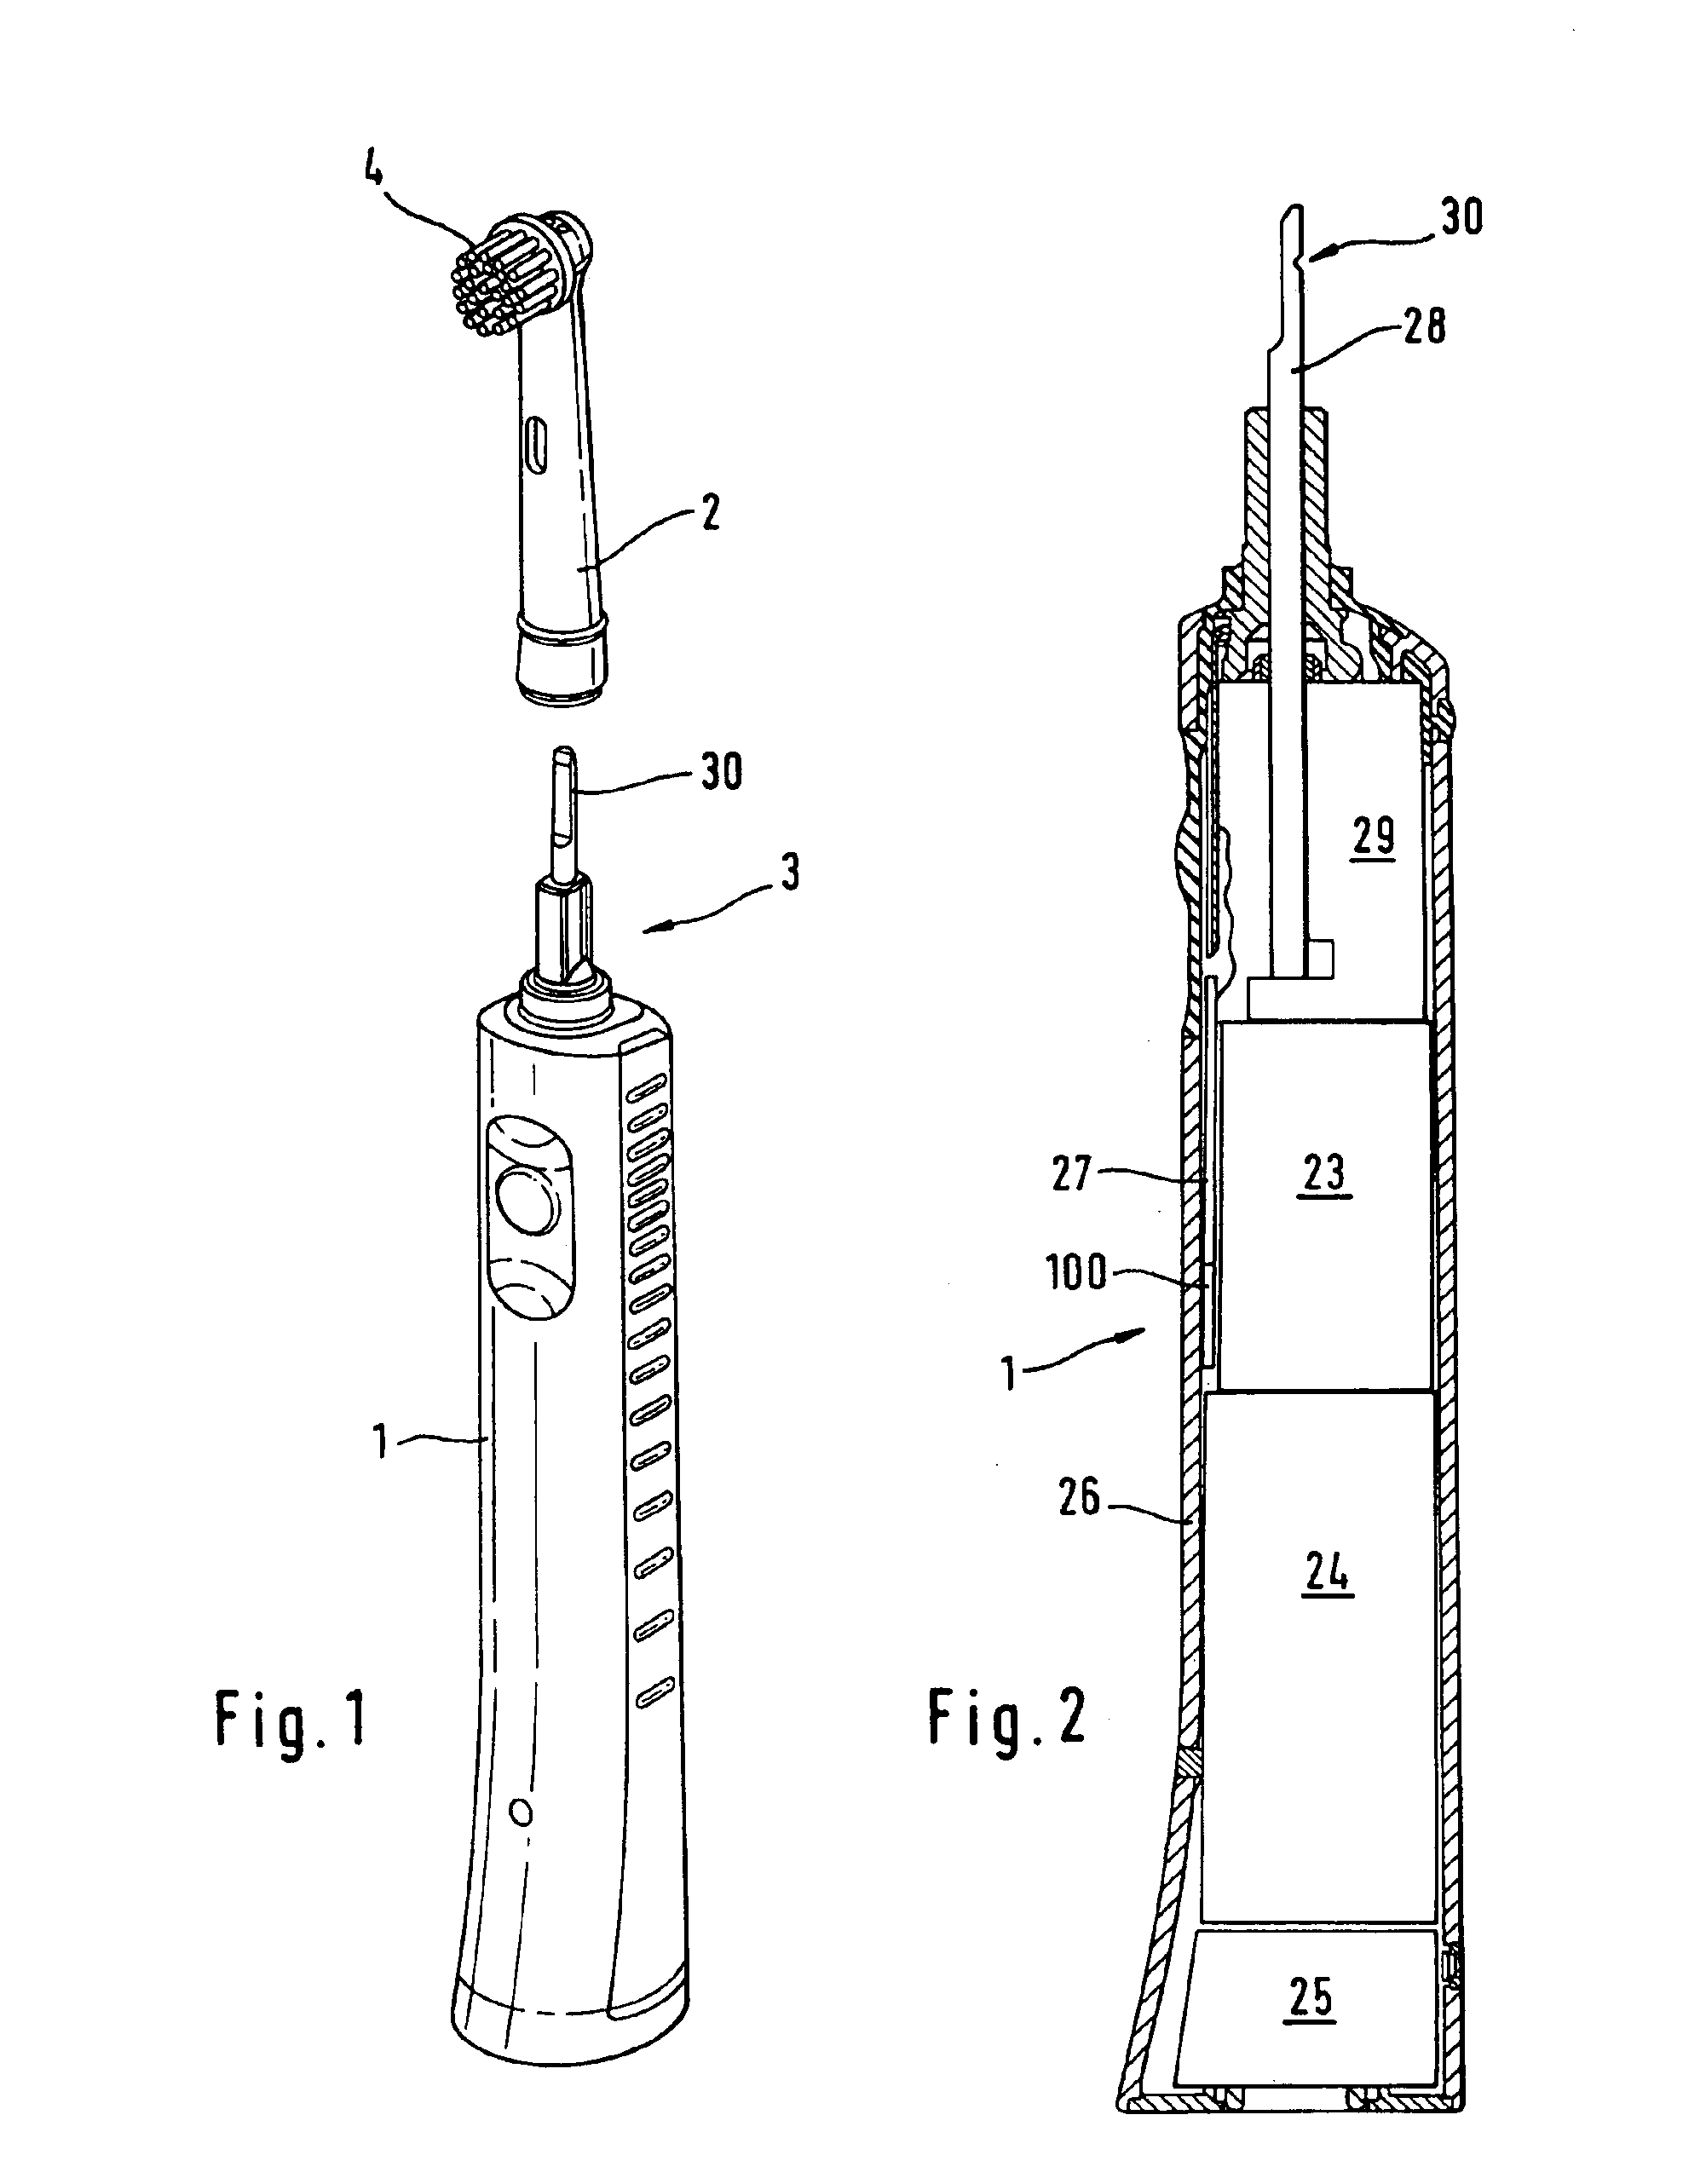 Electric dental cleaning device